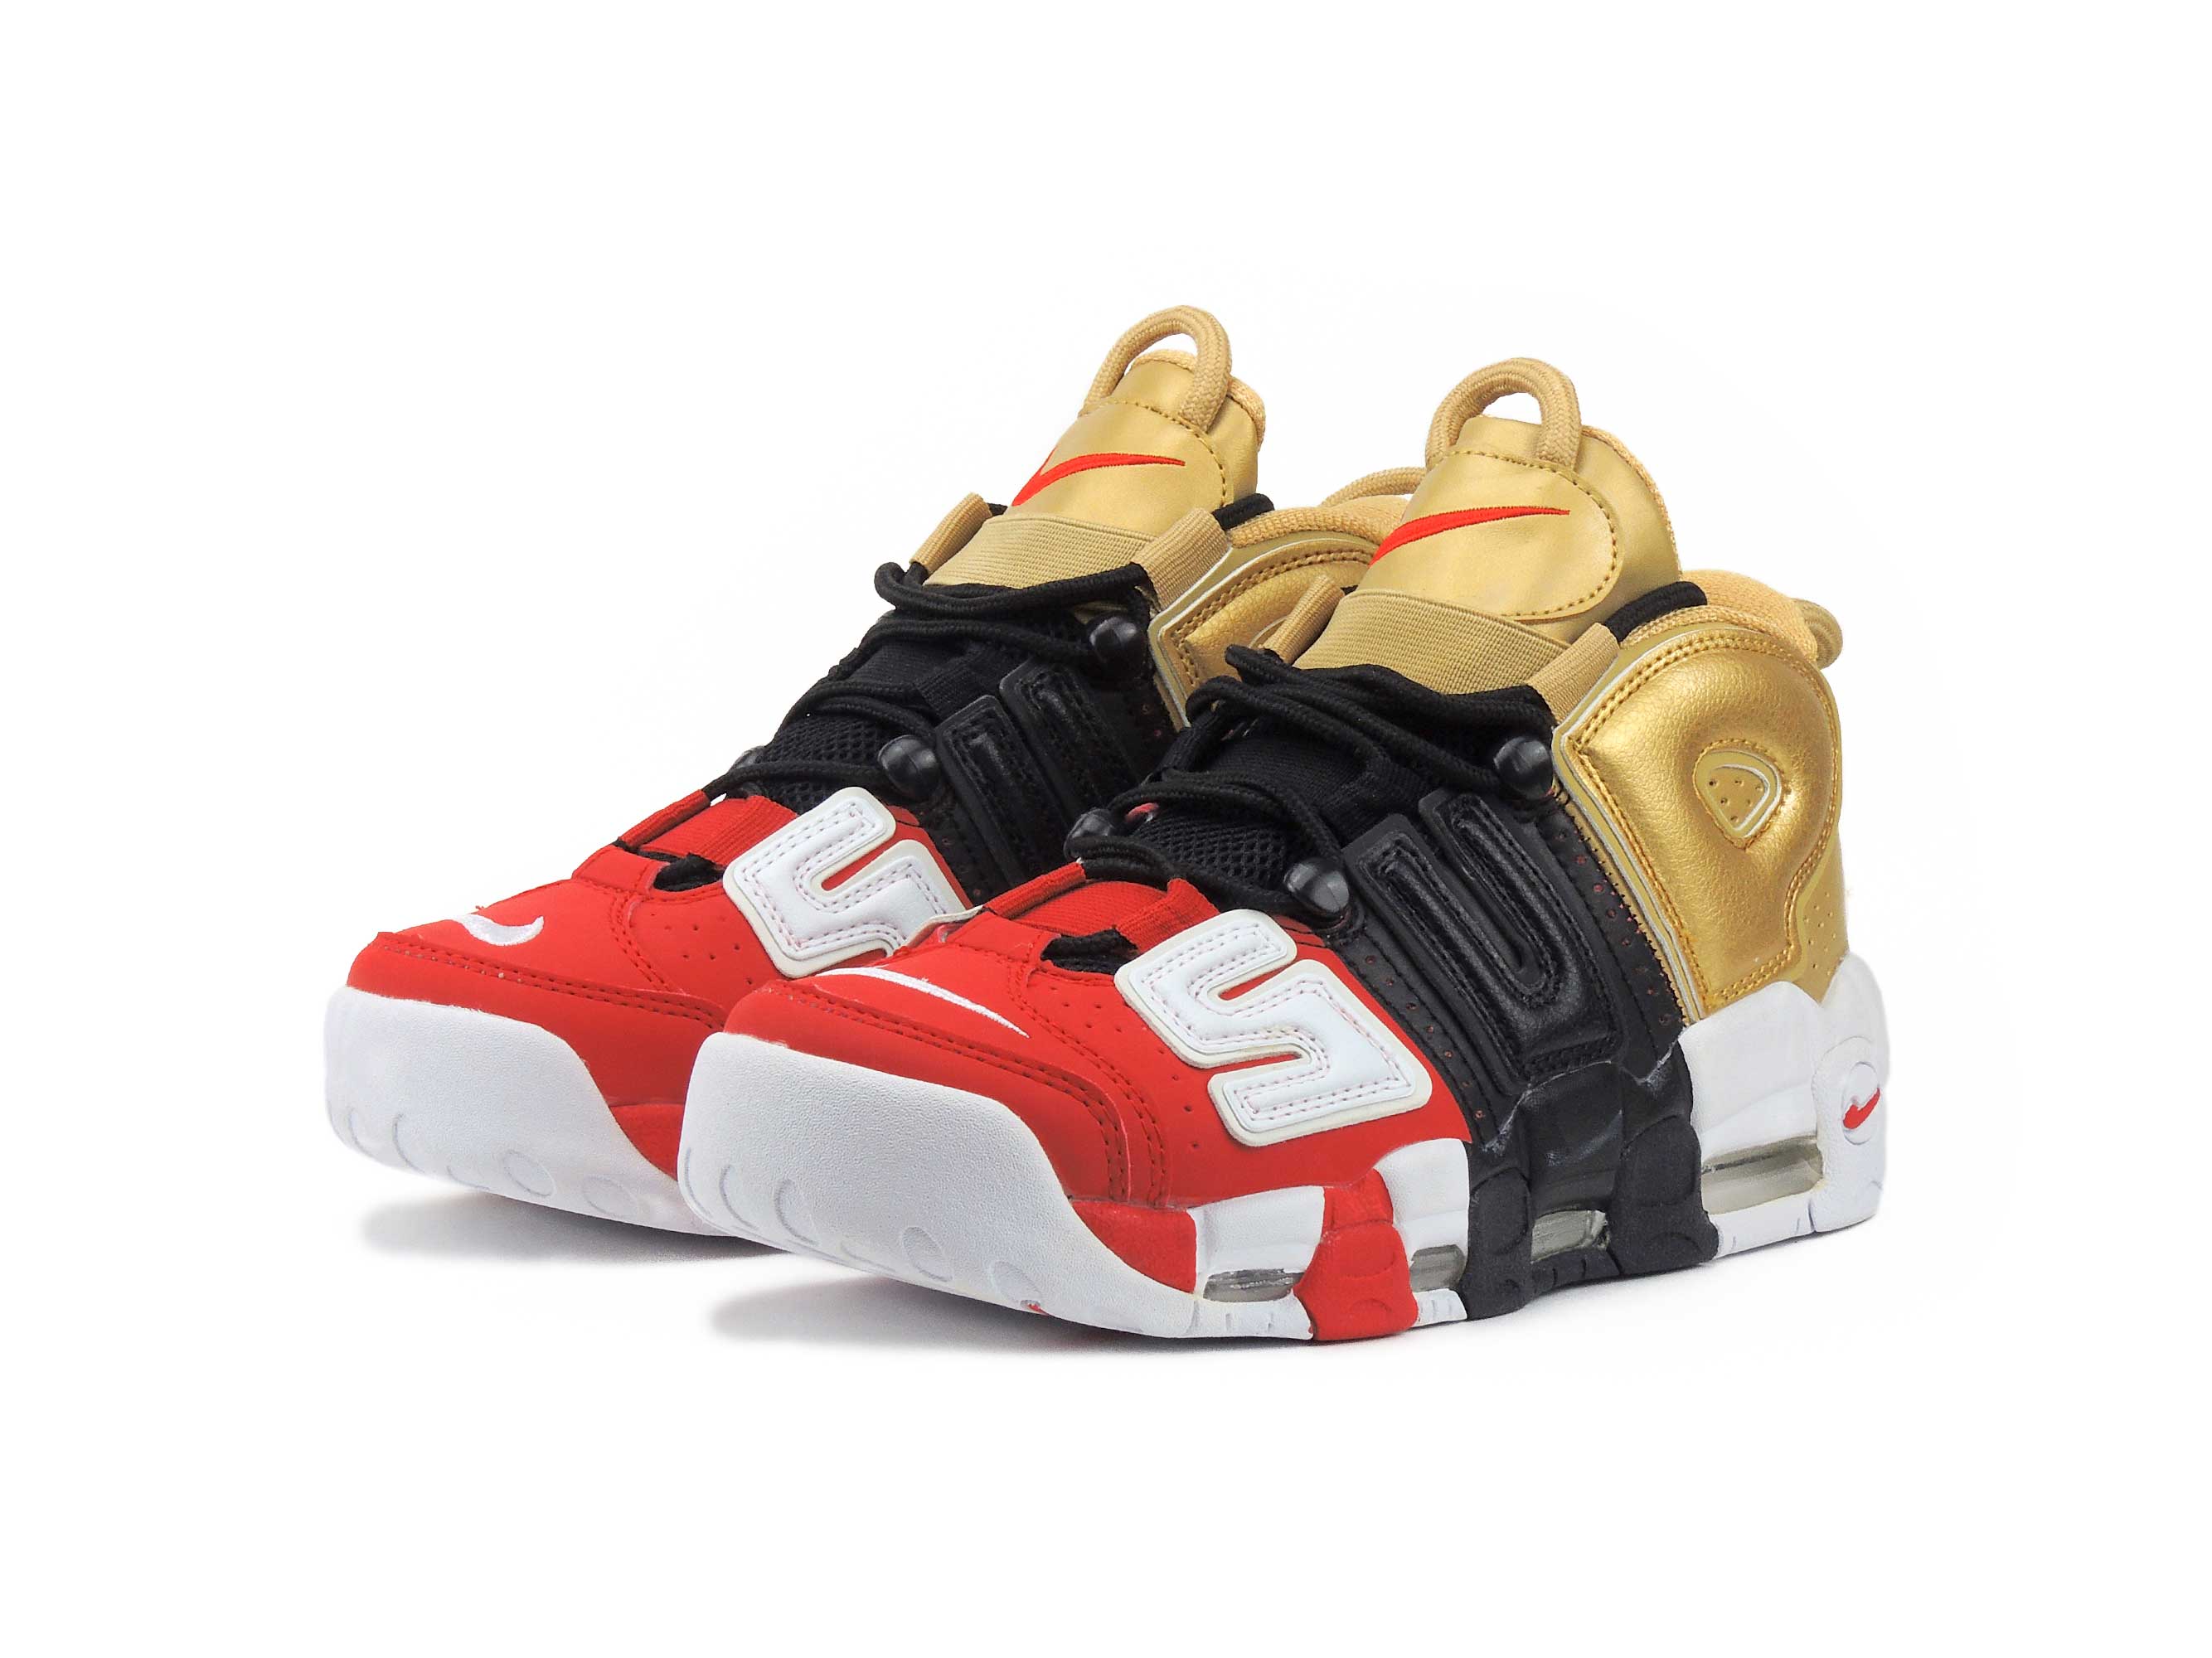 more uptempo red